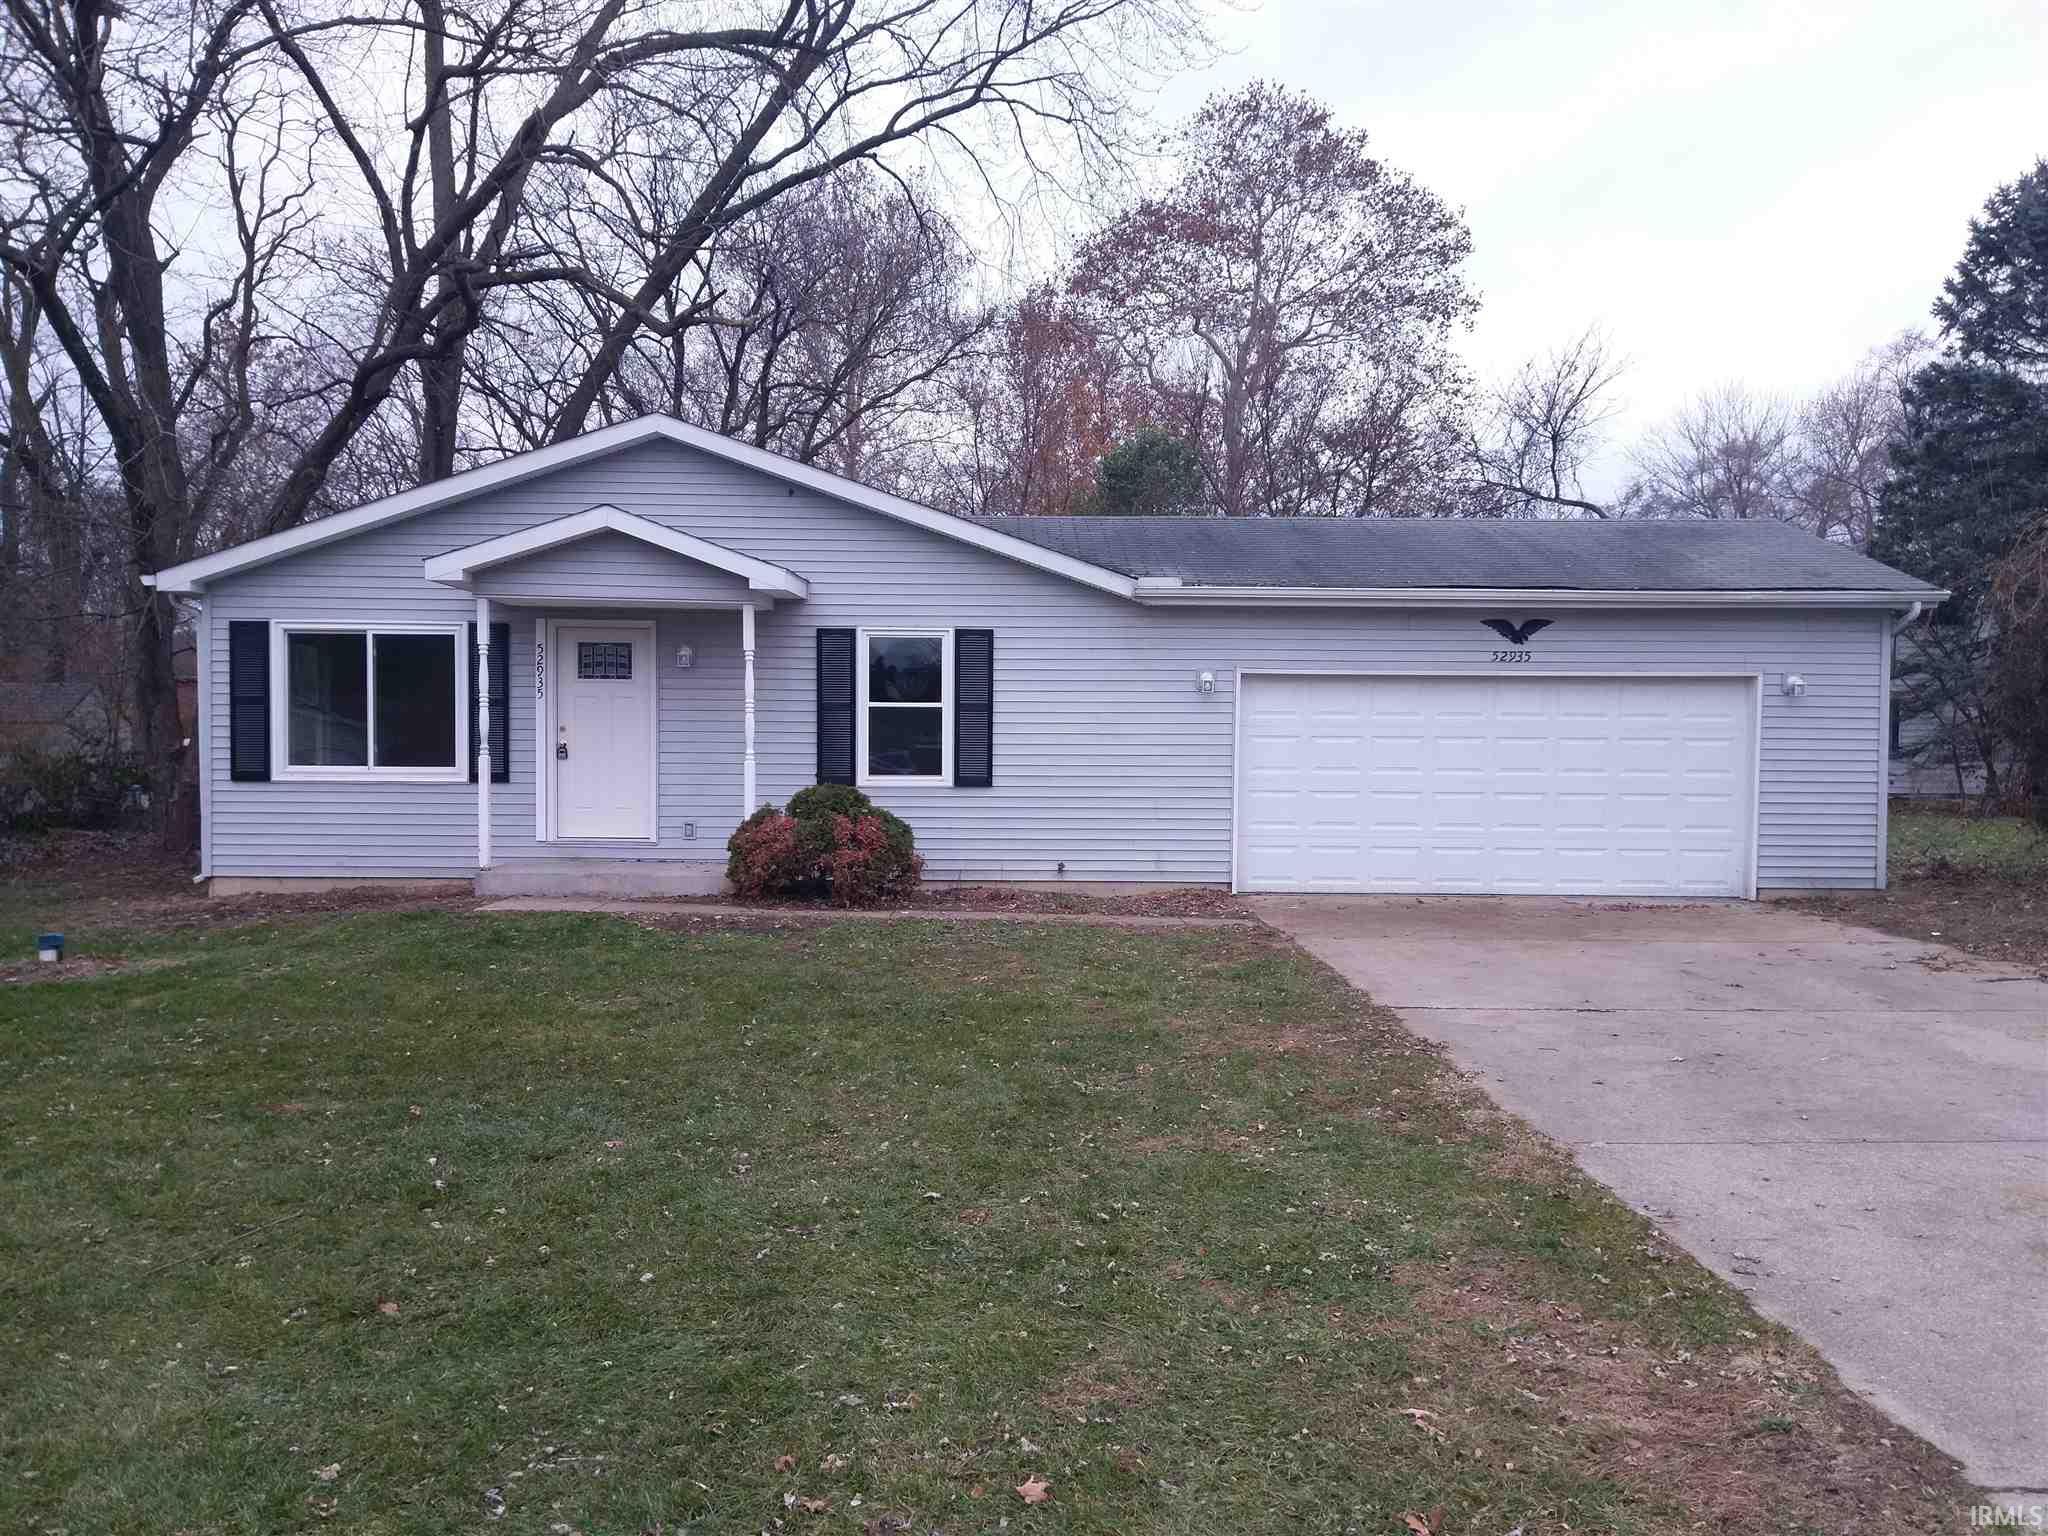 52935 Forestbrook South Bend, IN 46637